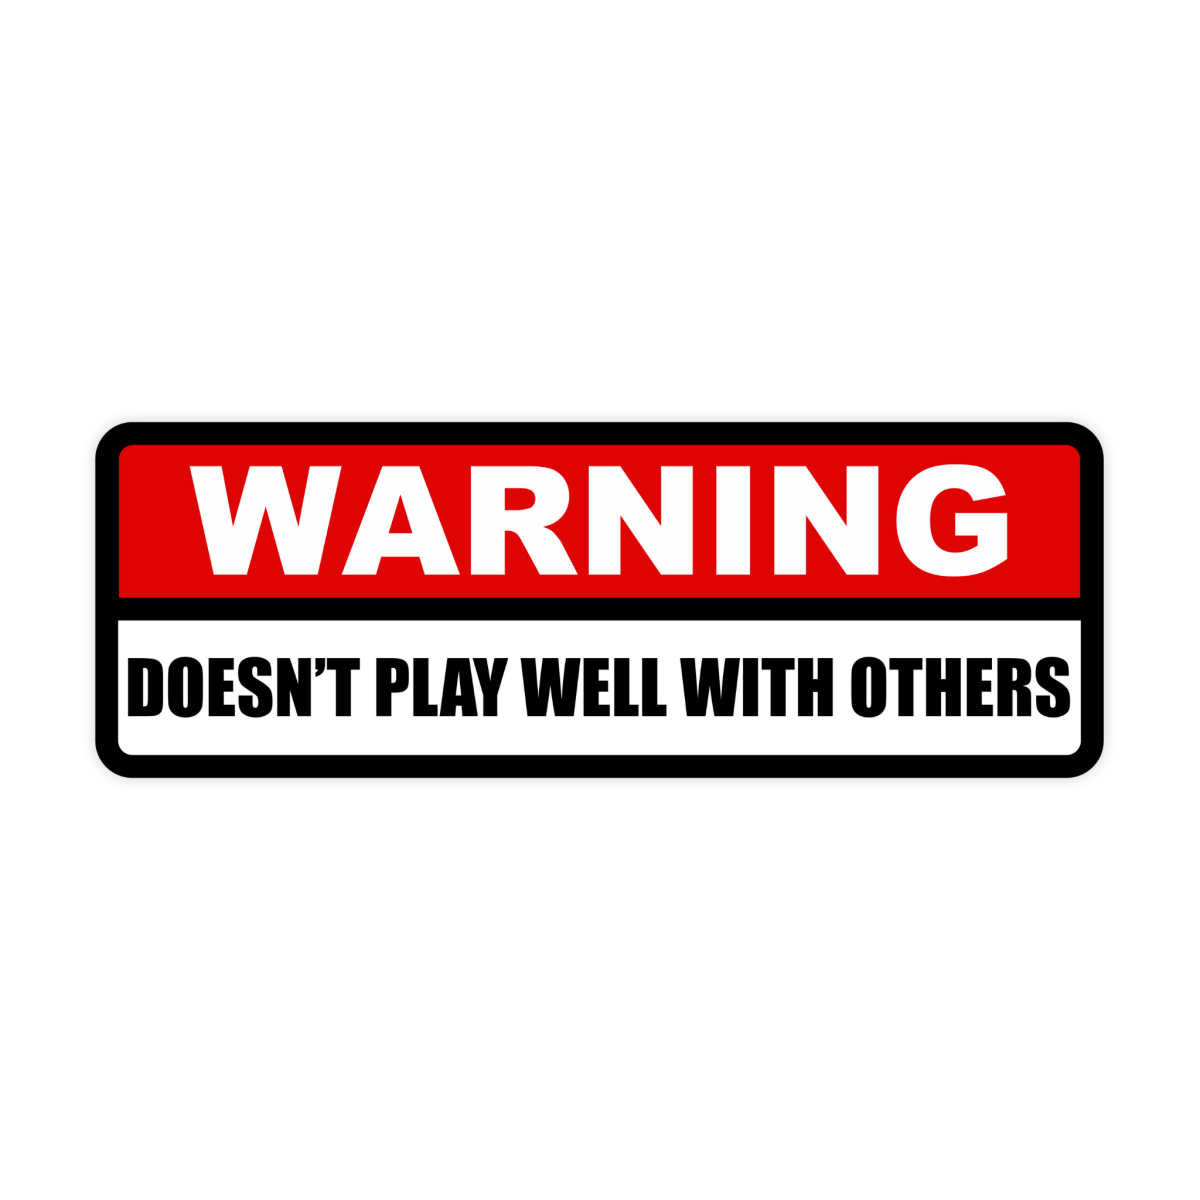 Warning Doesn't Play Well With Others Bumper Sticker - stickerbullWarning Doesn't Play Well With Others Bumper StickerRetail StickerstickerbullstickerbullSage_WarningPlayWell [#90]Warning Doesn't Play Well With Others Bumper Sticker